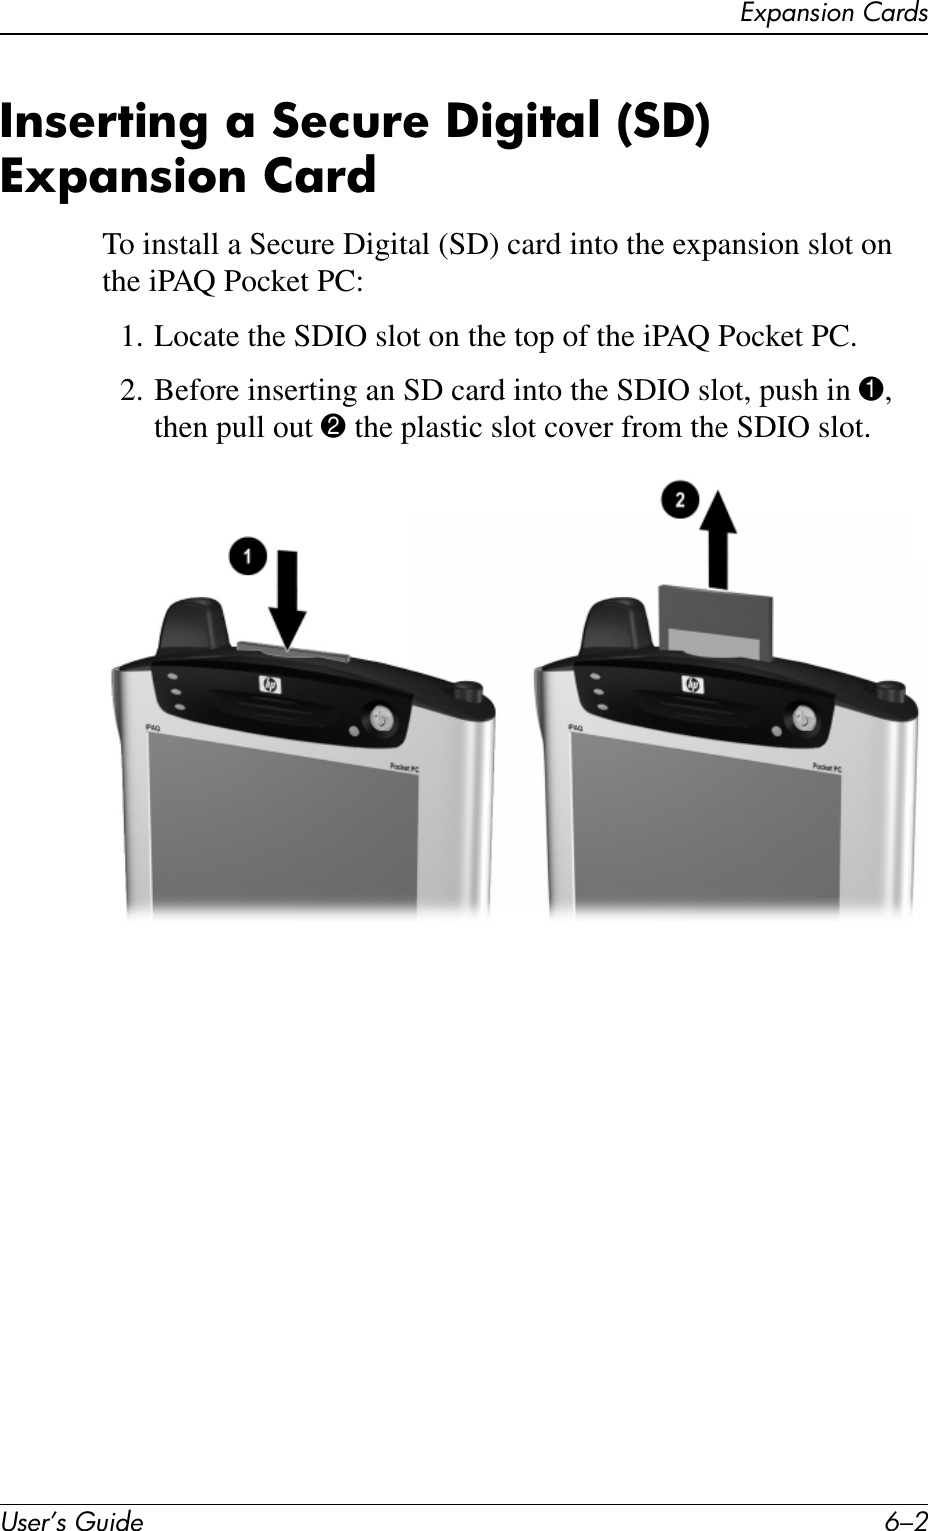 User’s Guide 6–2Expansion CardsInserting a Secure Digital (SD) Expansion CardTo install a Secure Digital (SD) card into the expansion slot on the iPAQ Pocket PC:1. Locate the SDIO slot on the top of the iPAQ Pocket PC.2. Before inserting an SD card into the SDIO slot, push in 1, then pull out 2 the plastic slot cover from the SDIO slot.